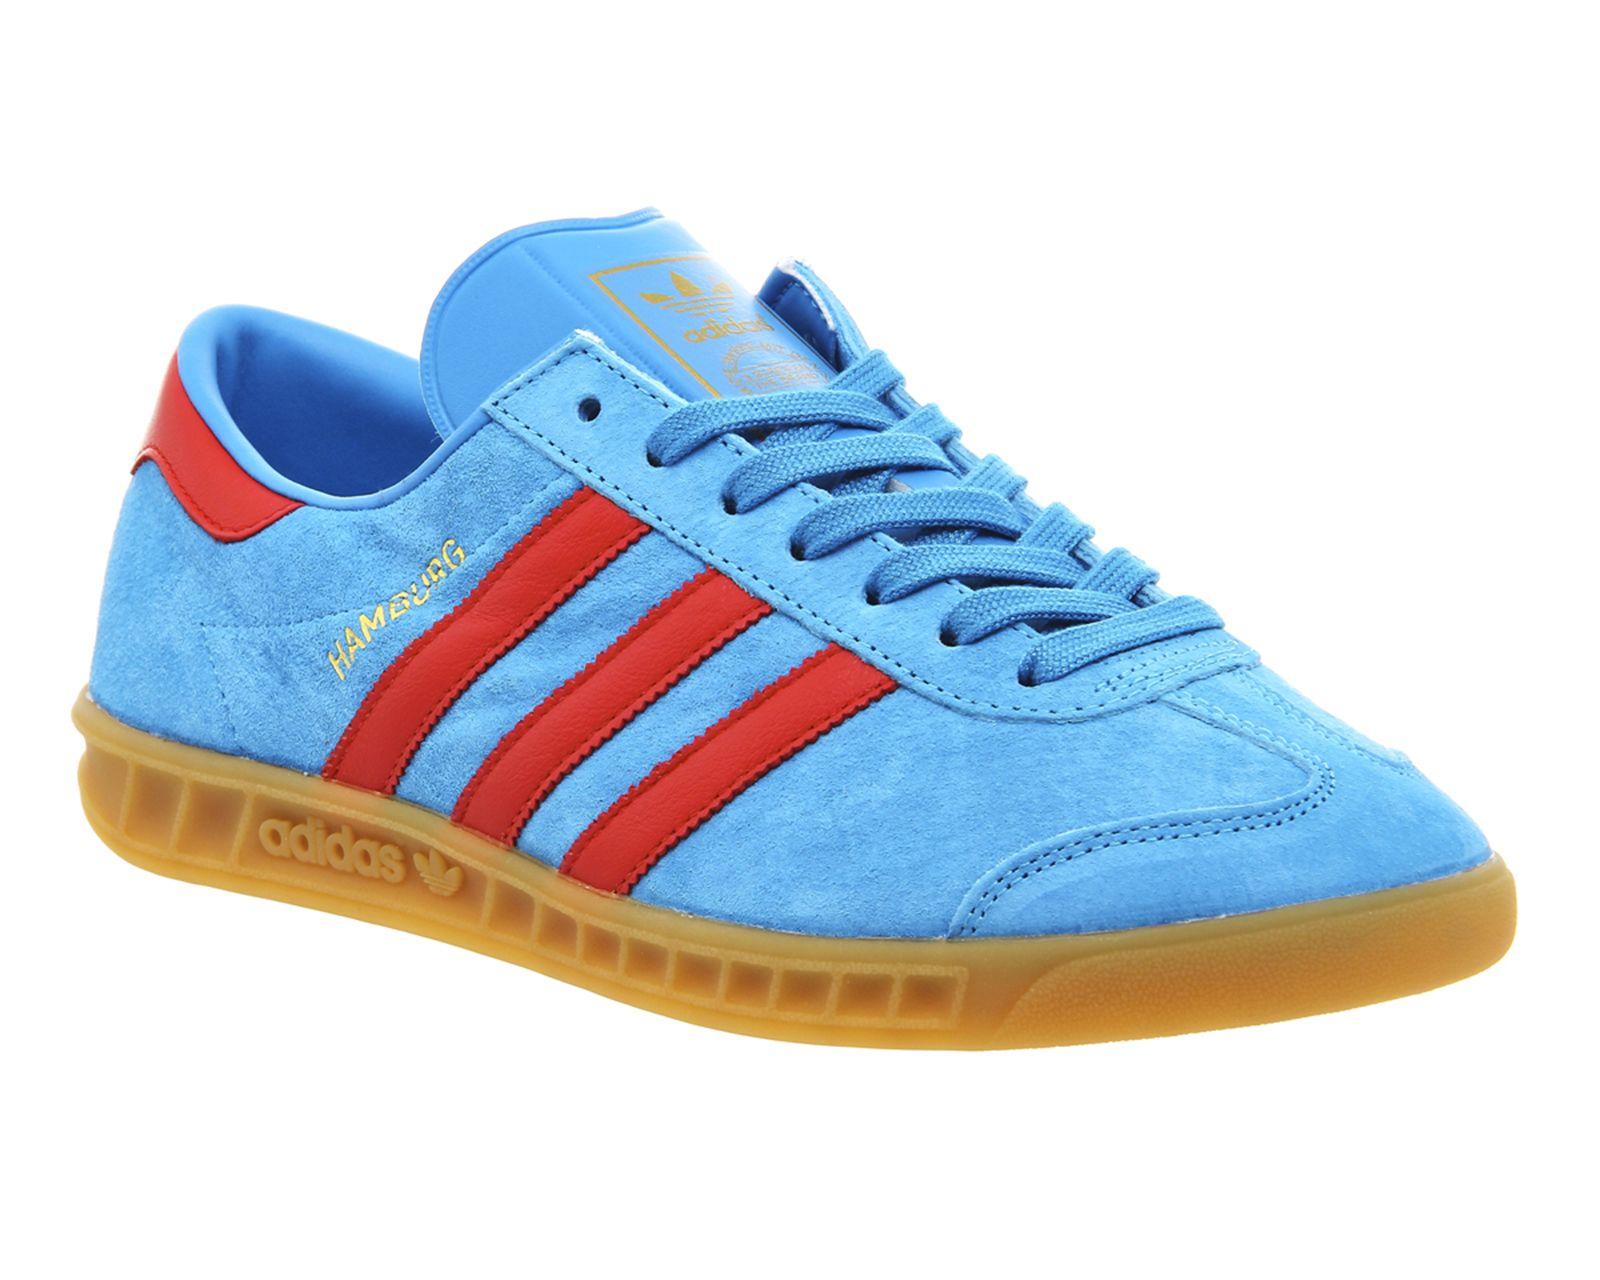 Blue and Red Adidas Logo - Adidas Hamburg Trainers Solar Blue Red Gum - His trainers